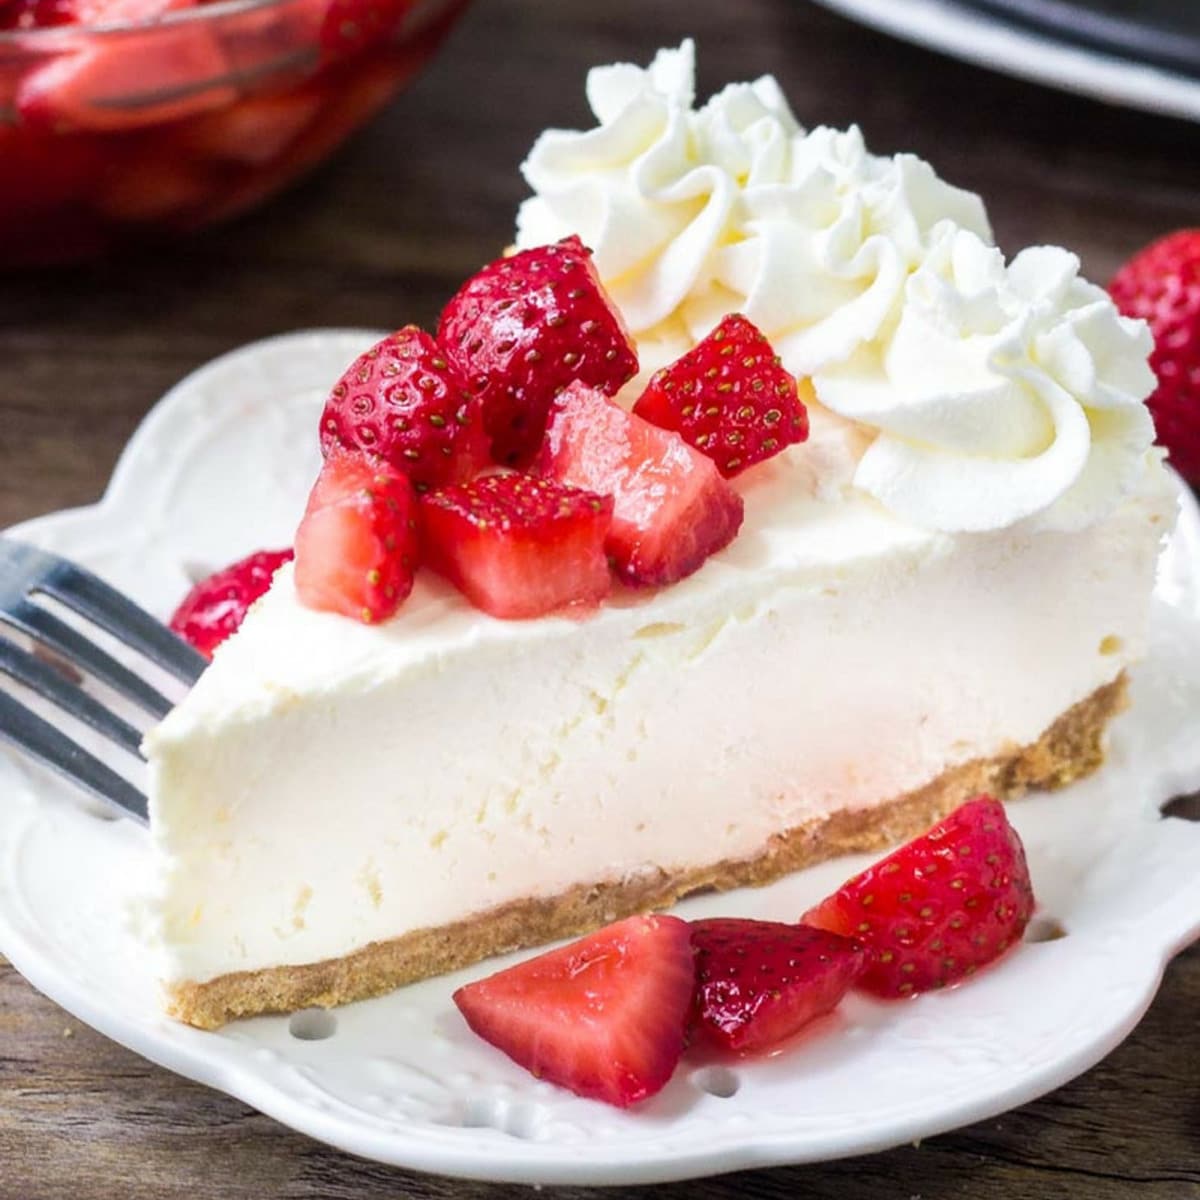 Summer Recipes - No bake cheesecake with fresh strawberries on top.